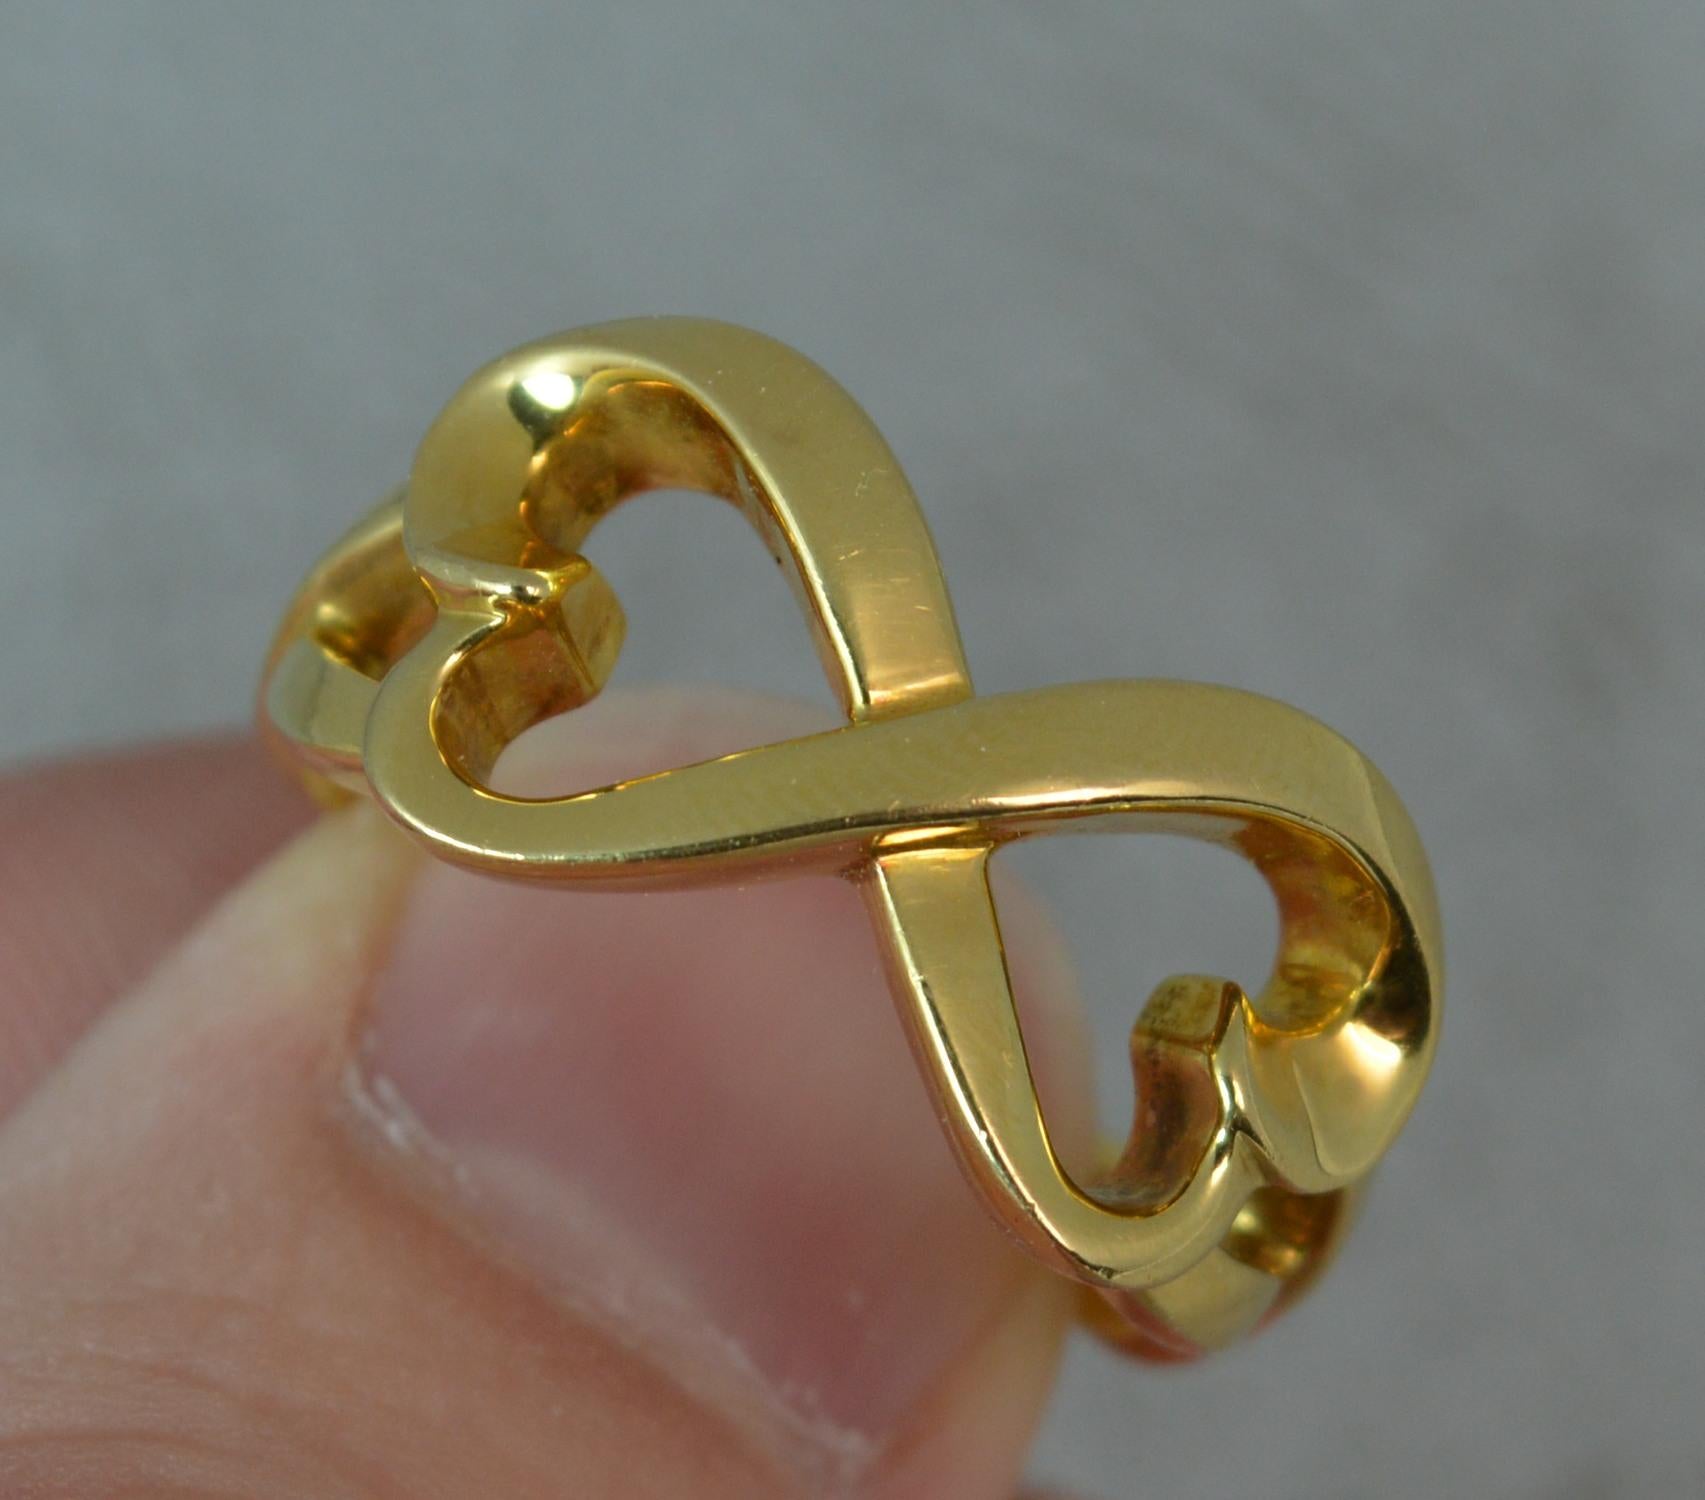 A Tiffany and Co 18 carat yellow gold ring.
SIZE ; R 1/2 UK, 9 US
Double twined heart shape design. 22mm x 11mm head.
Well made, good gauge of gold.

CONDITION ; Very good. Crisp pattern. Clean and solid shank. With pouch etc. Please view